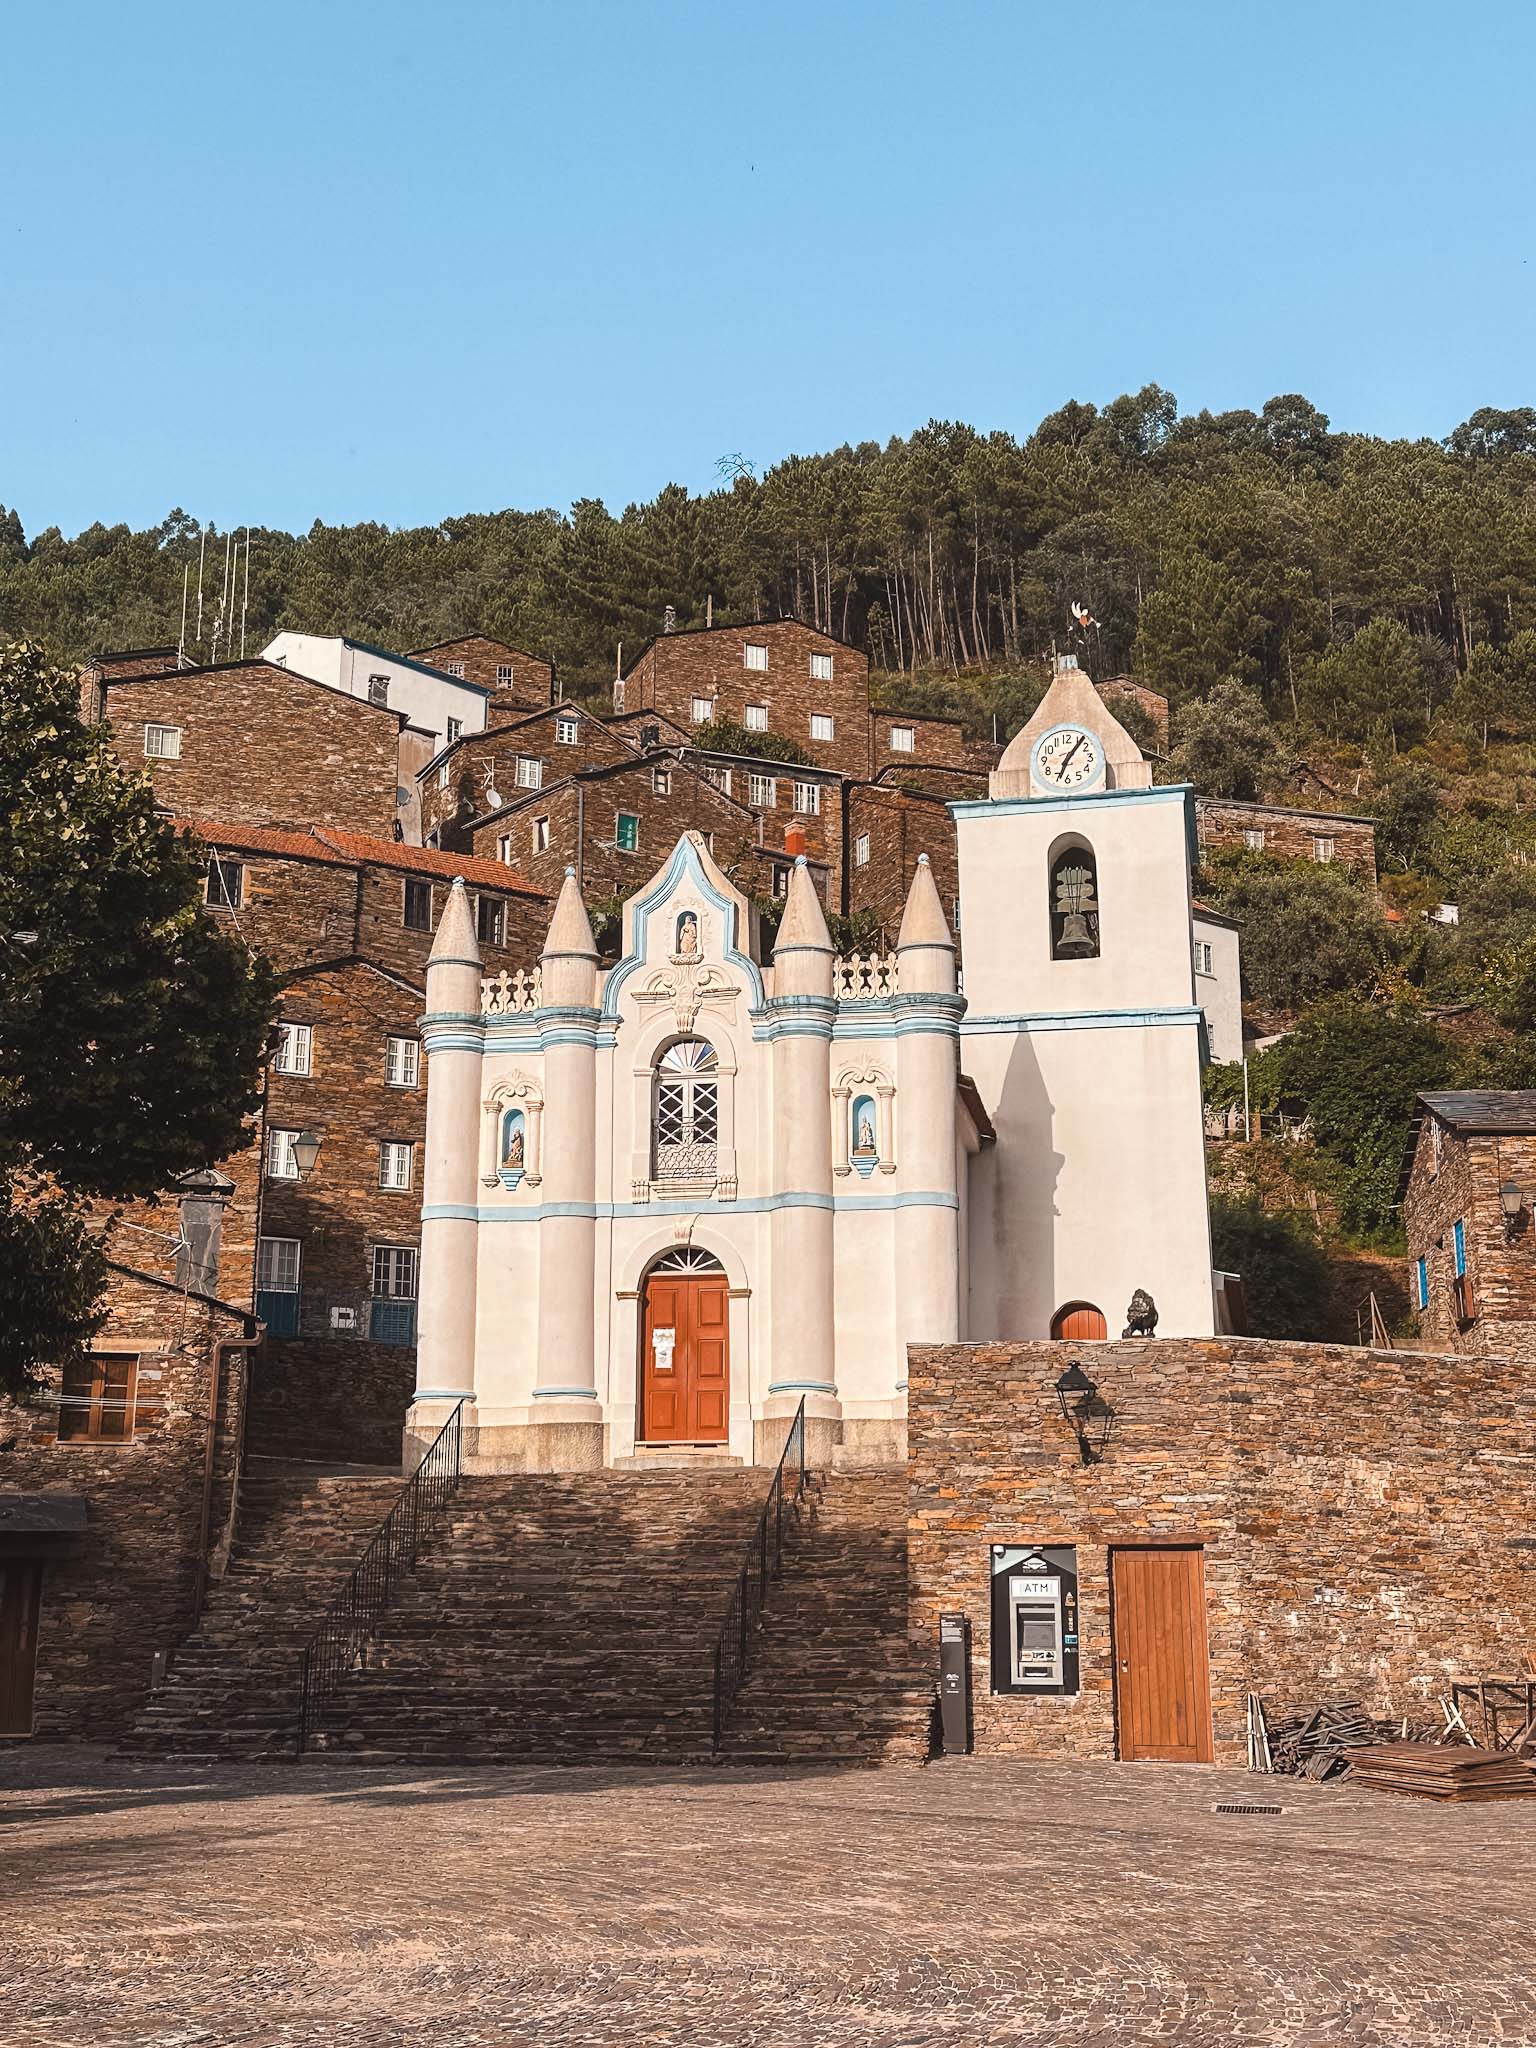 Piódão, one of the Historical Villages of Portugal